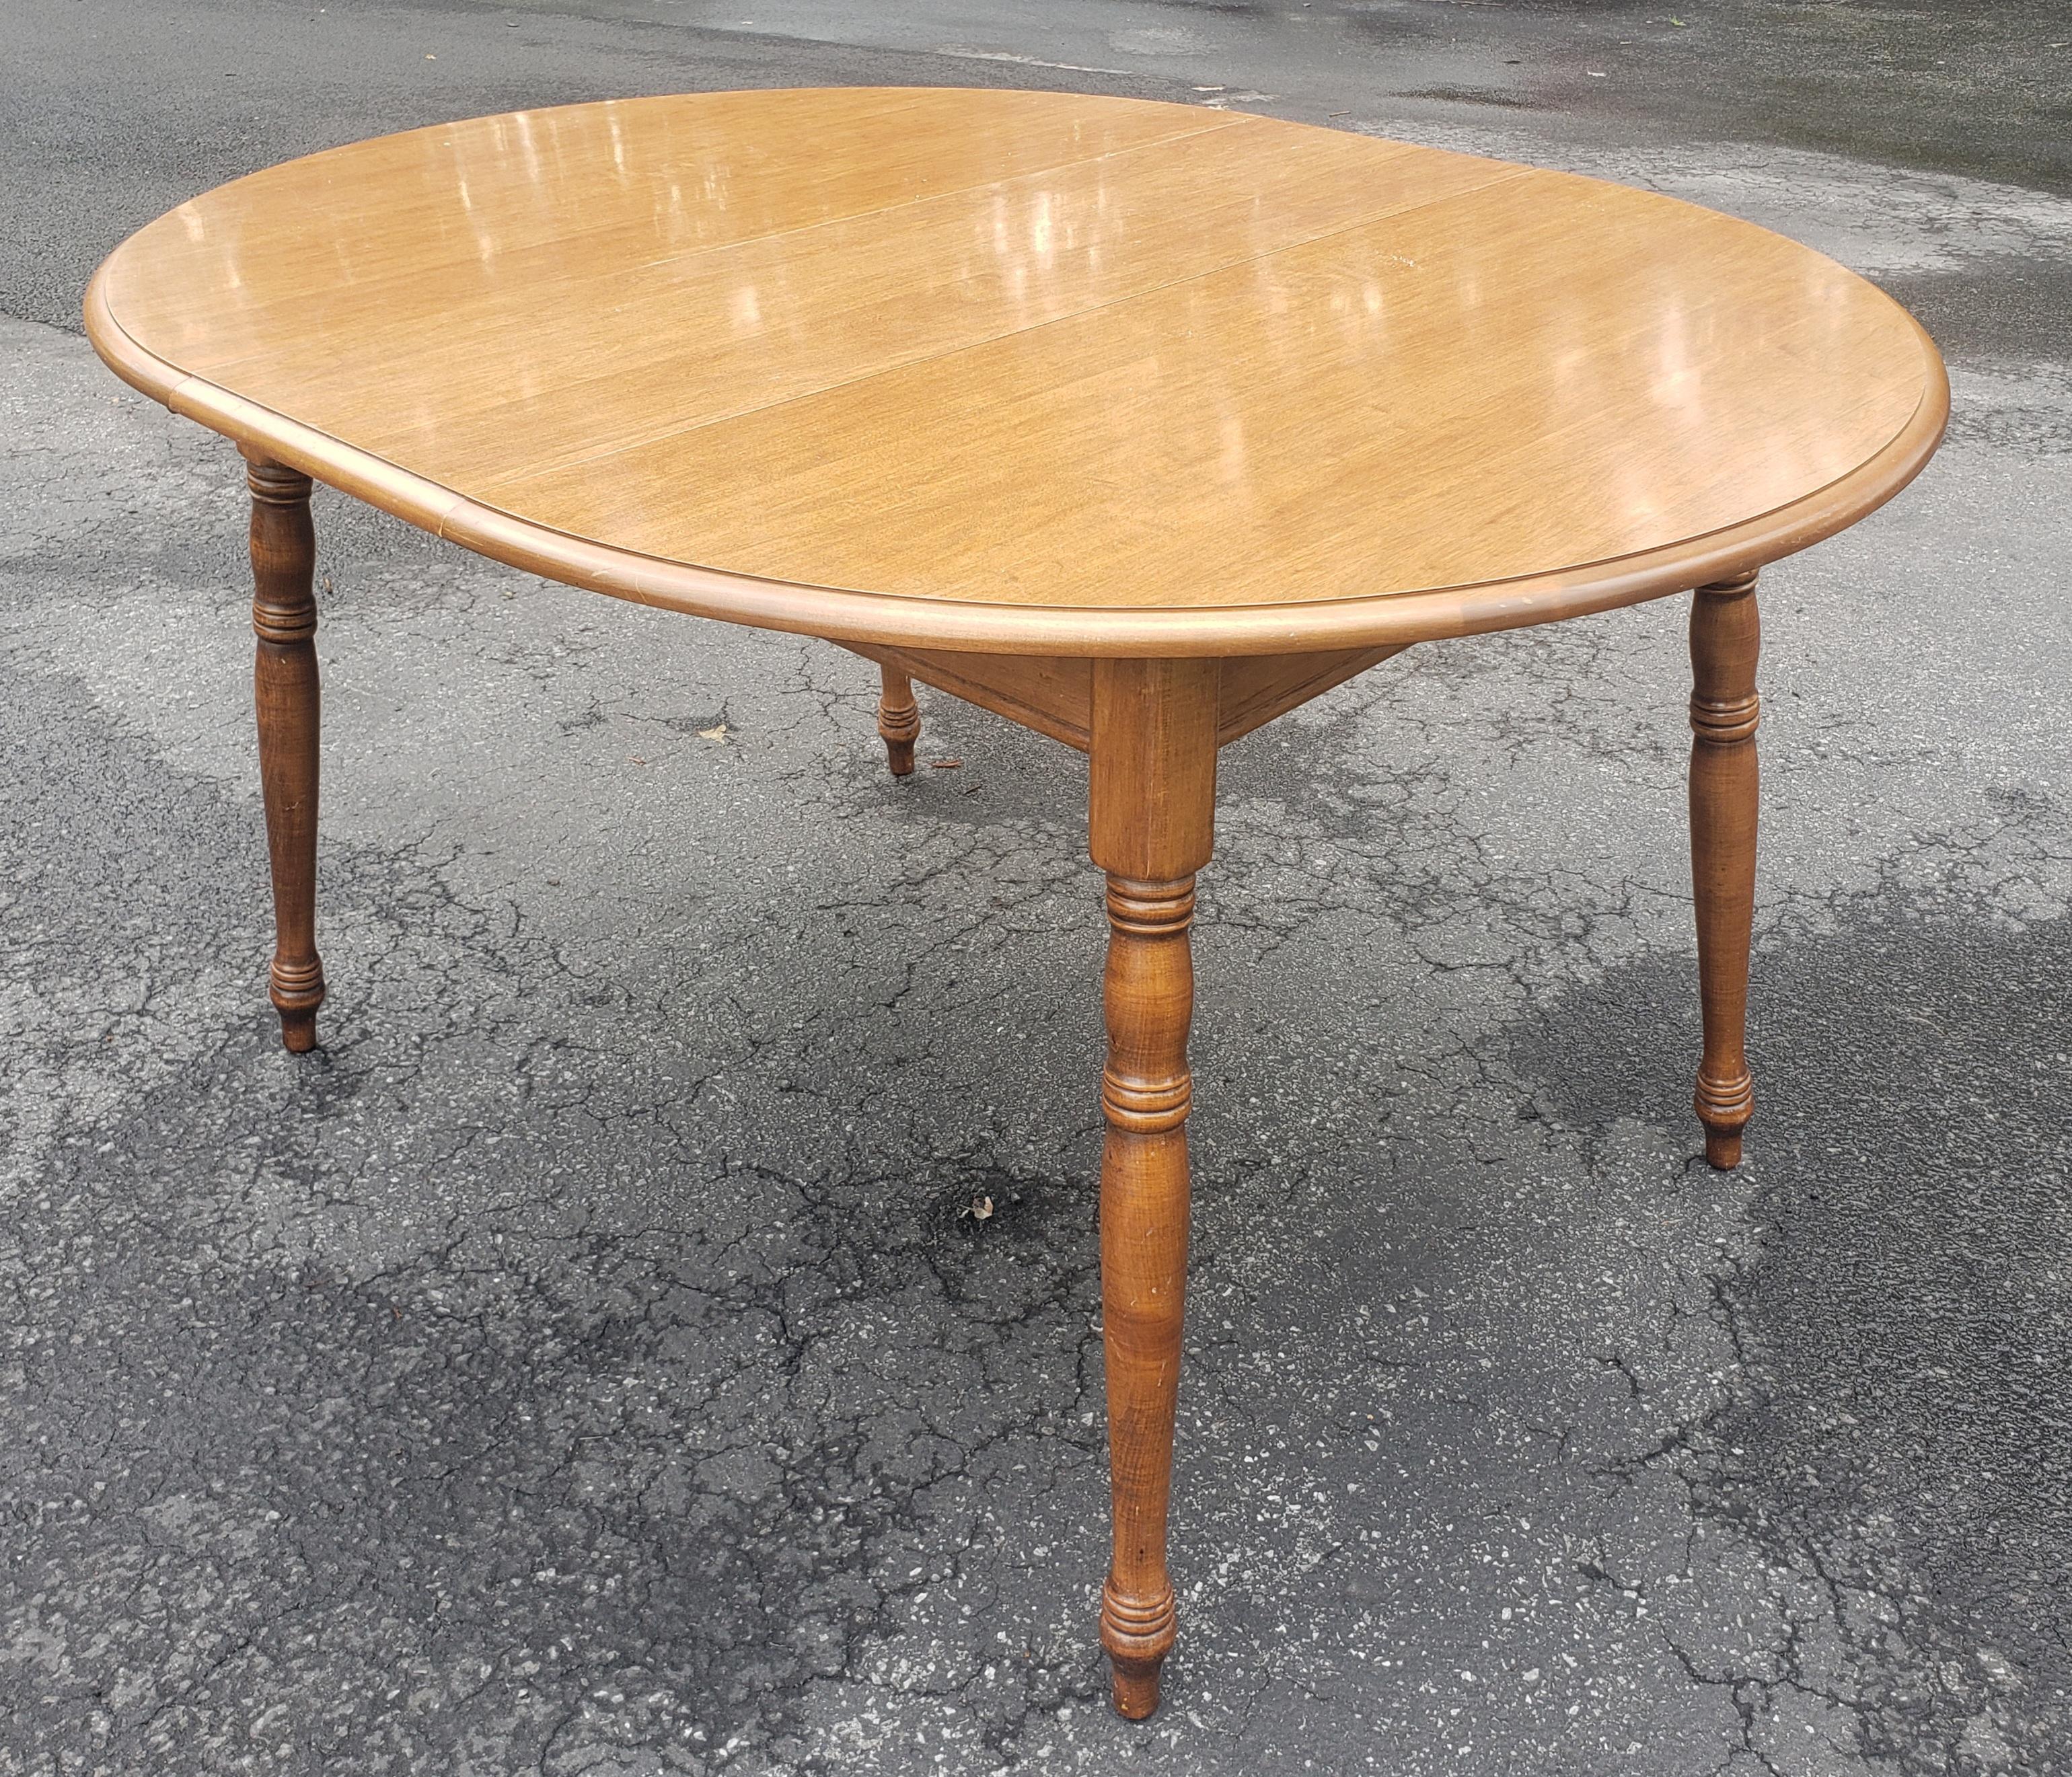 20th Century Early American Style Maple Small Dining or Kitchen Table For Sale